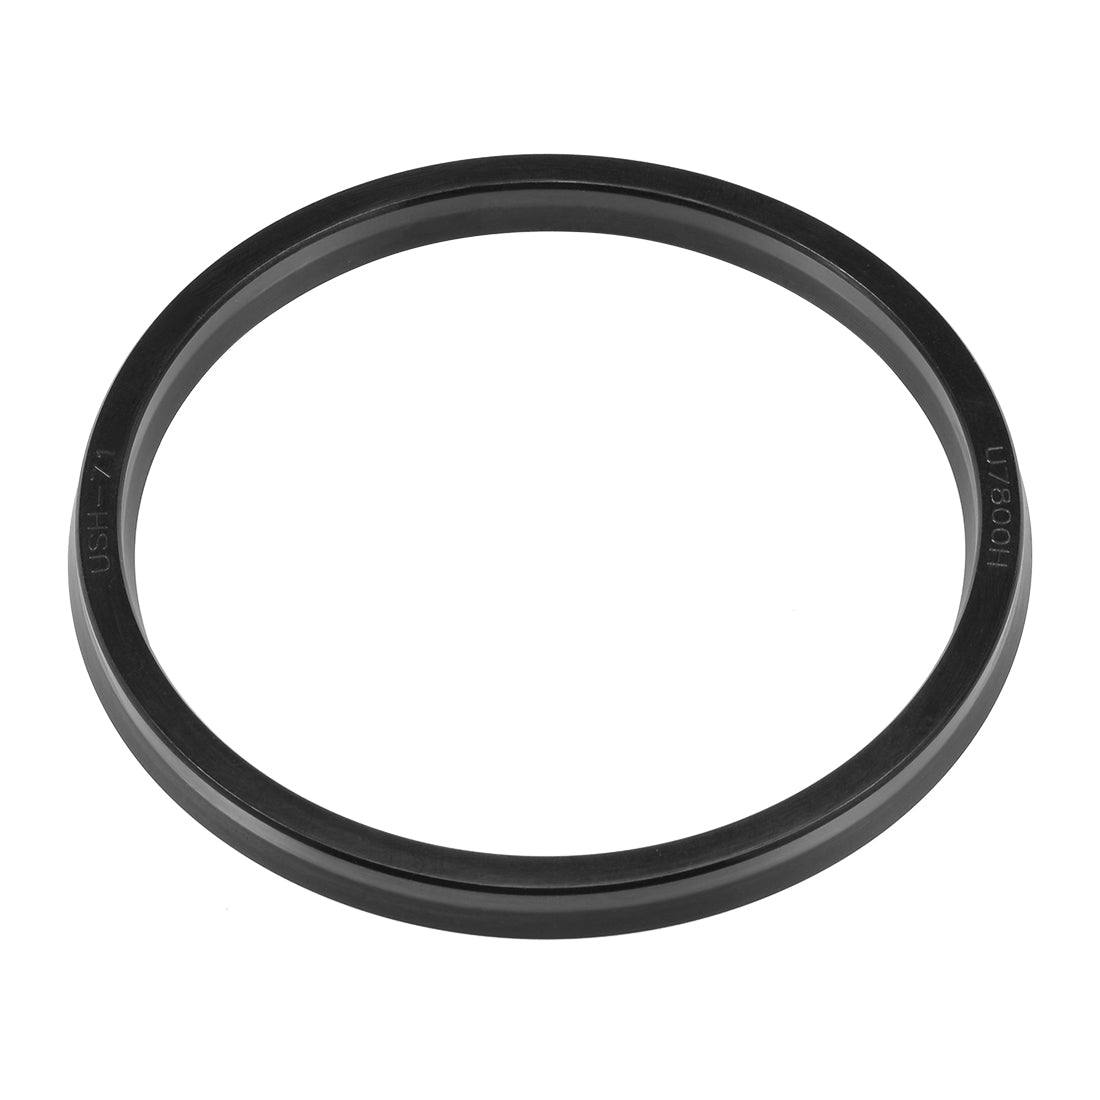 uxcell Uxcell Hydraulic Seal, Piston Shaft USH Oil Sealing O-Ring, 71mm x 80mm x 6mm